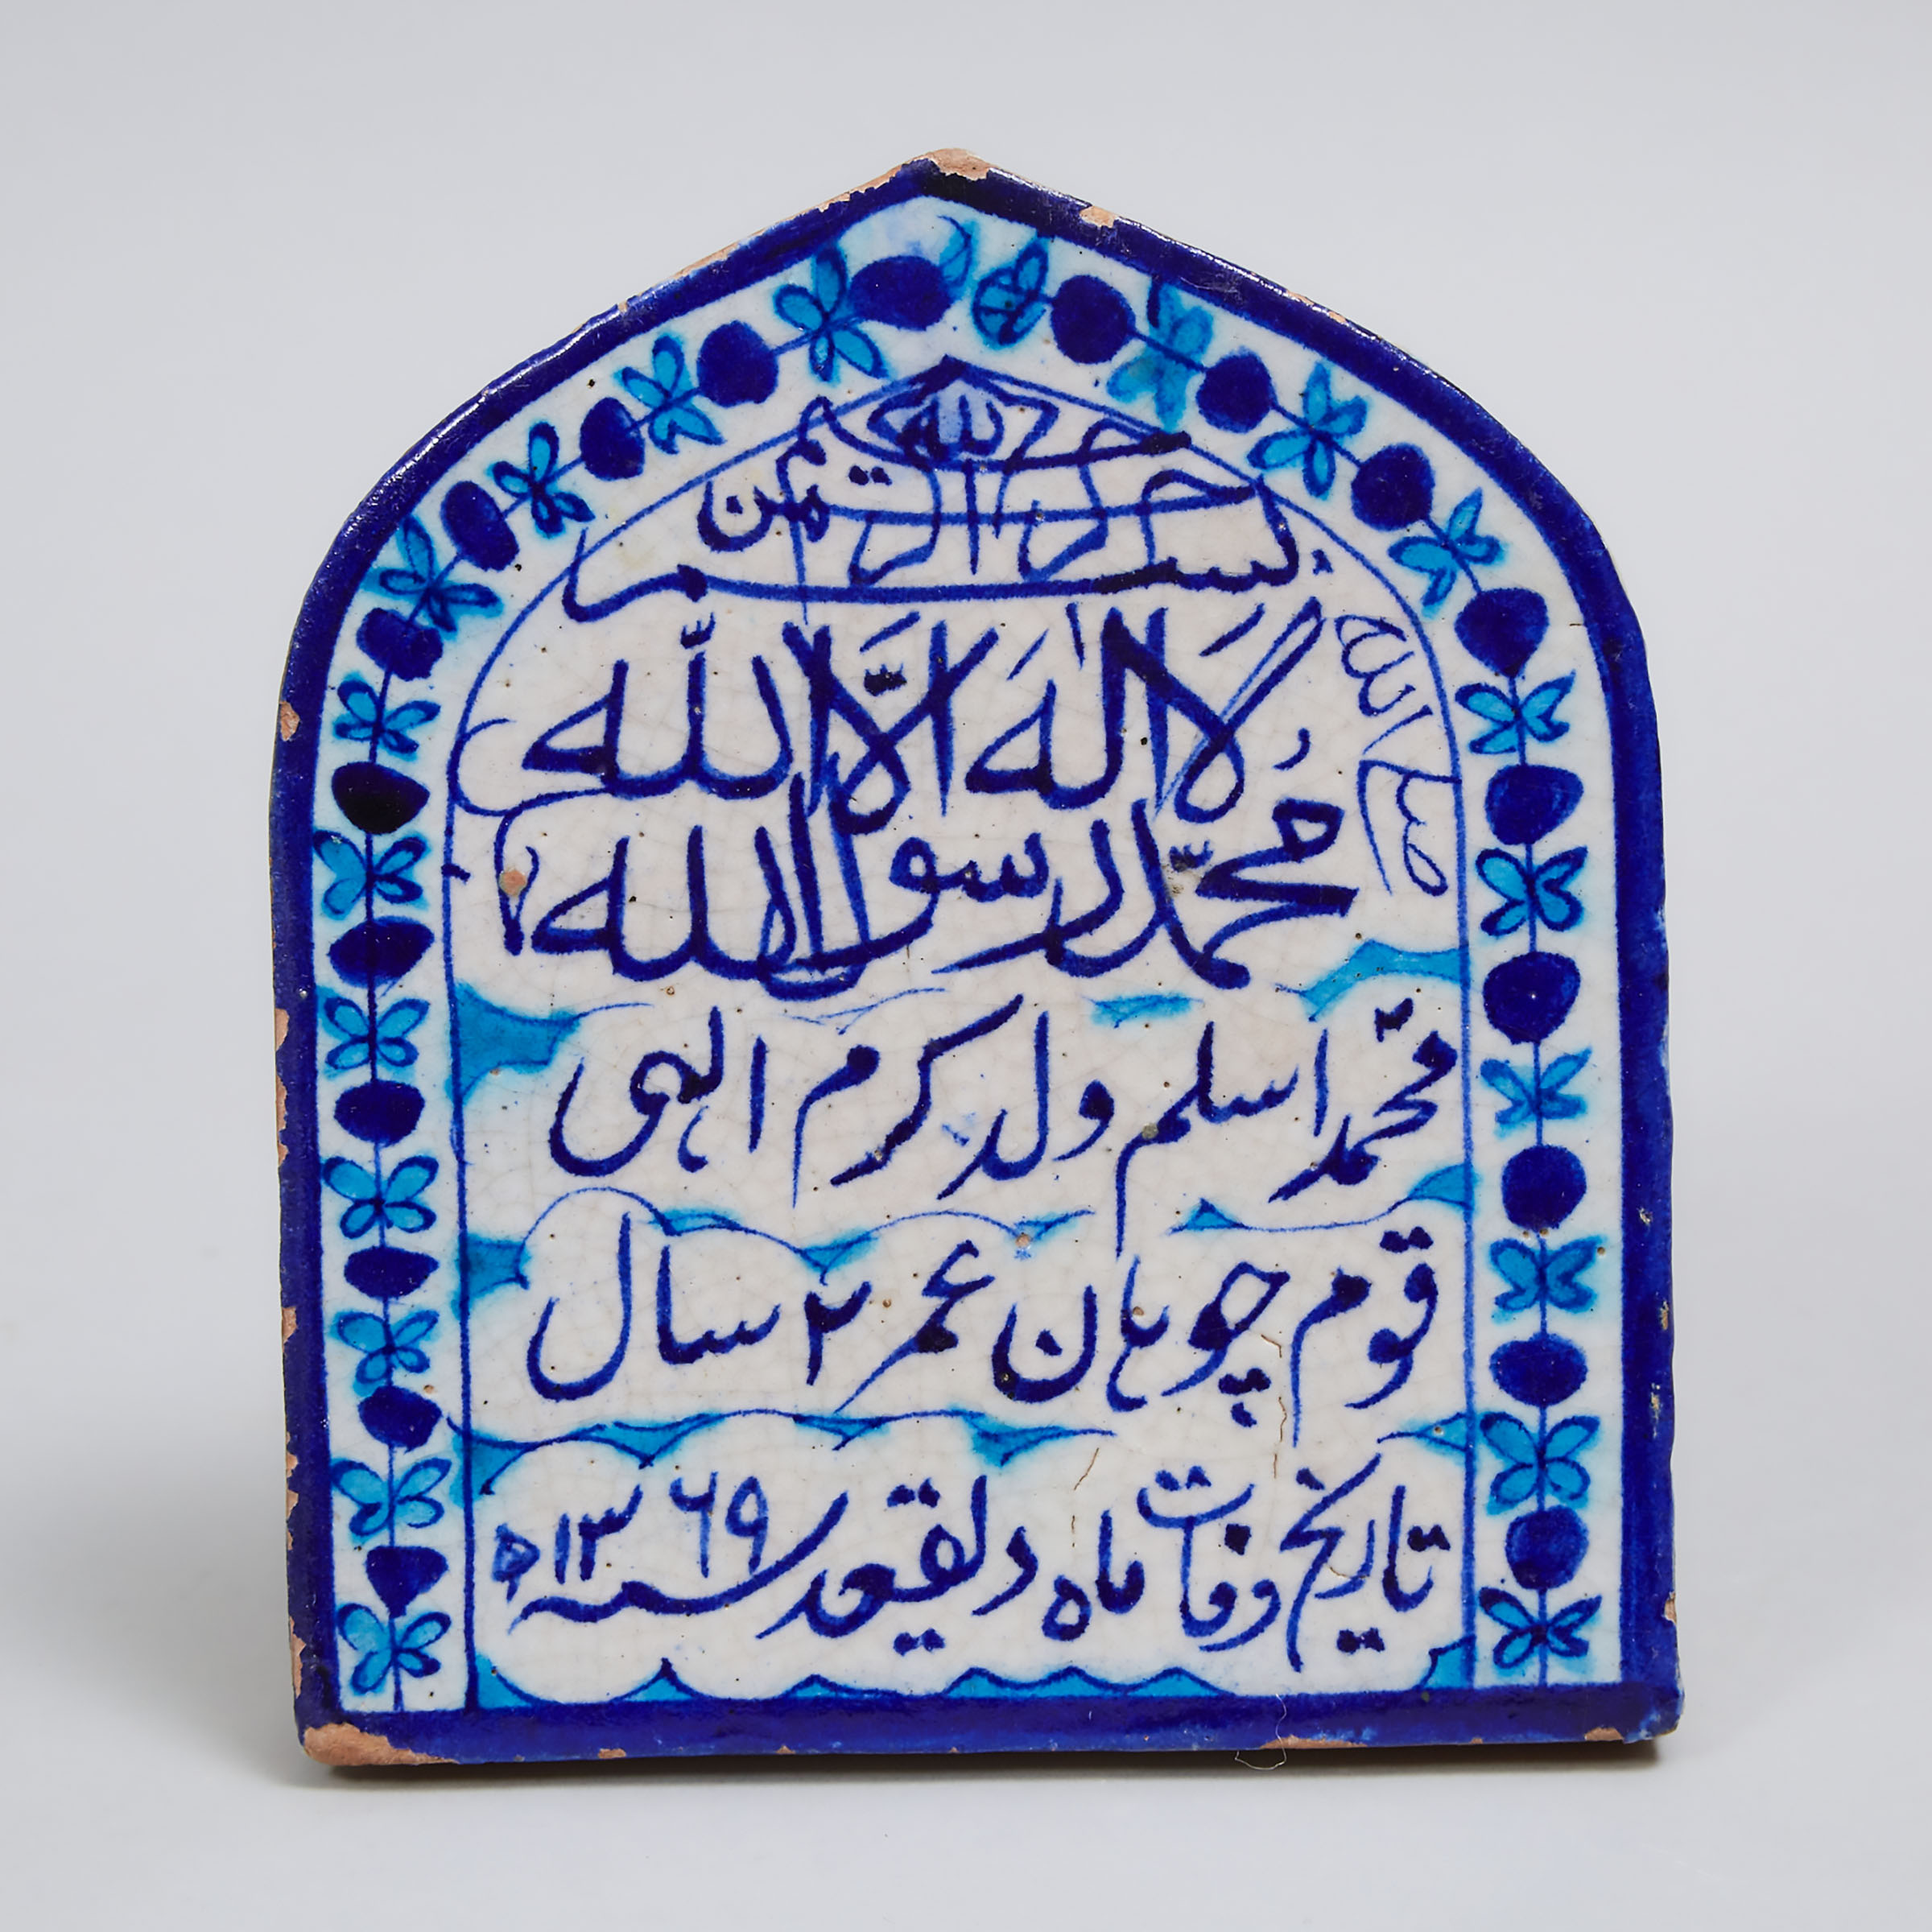 Indo-Persian Shiite Cobalt Blue and Turqoise Pottery Pointed Arch Mihrab Grave Tile, c.1920